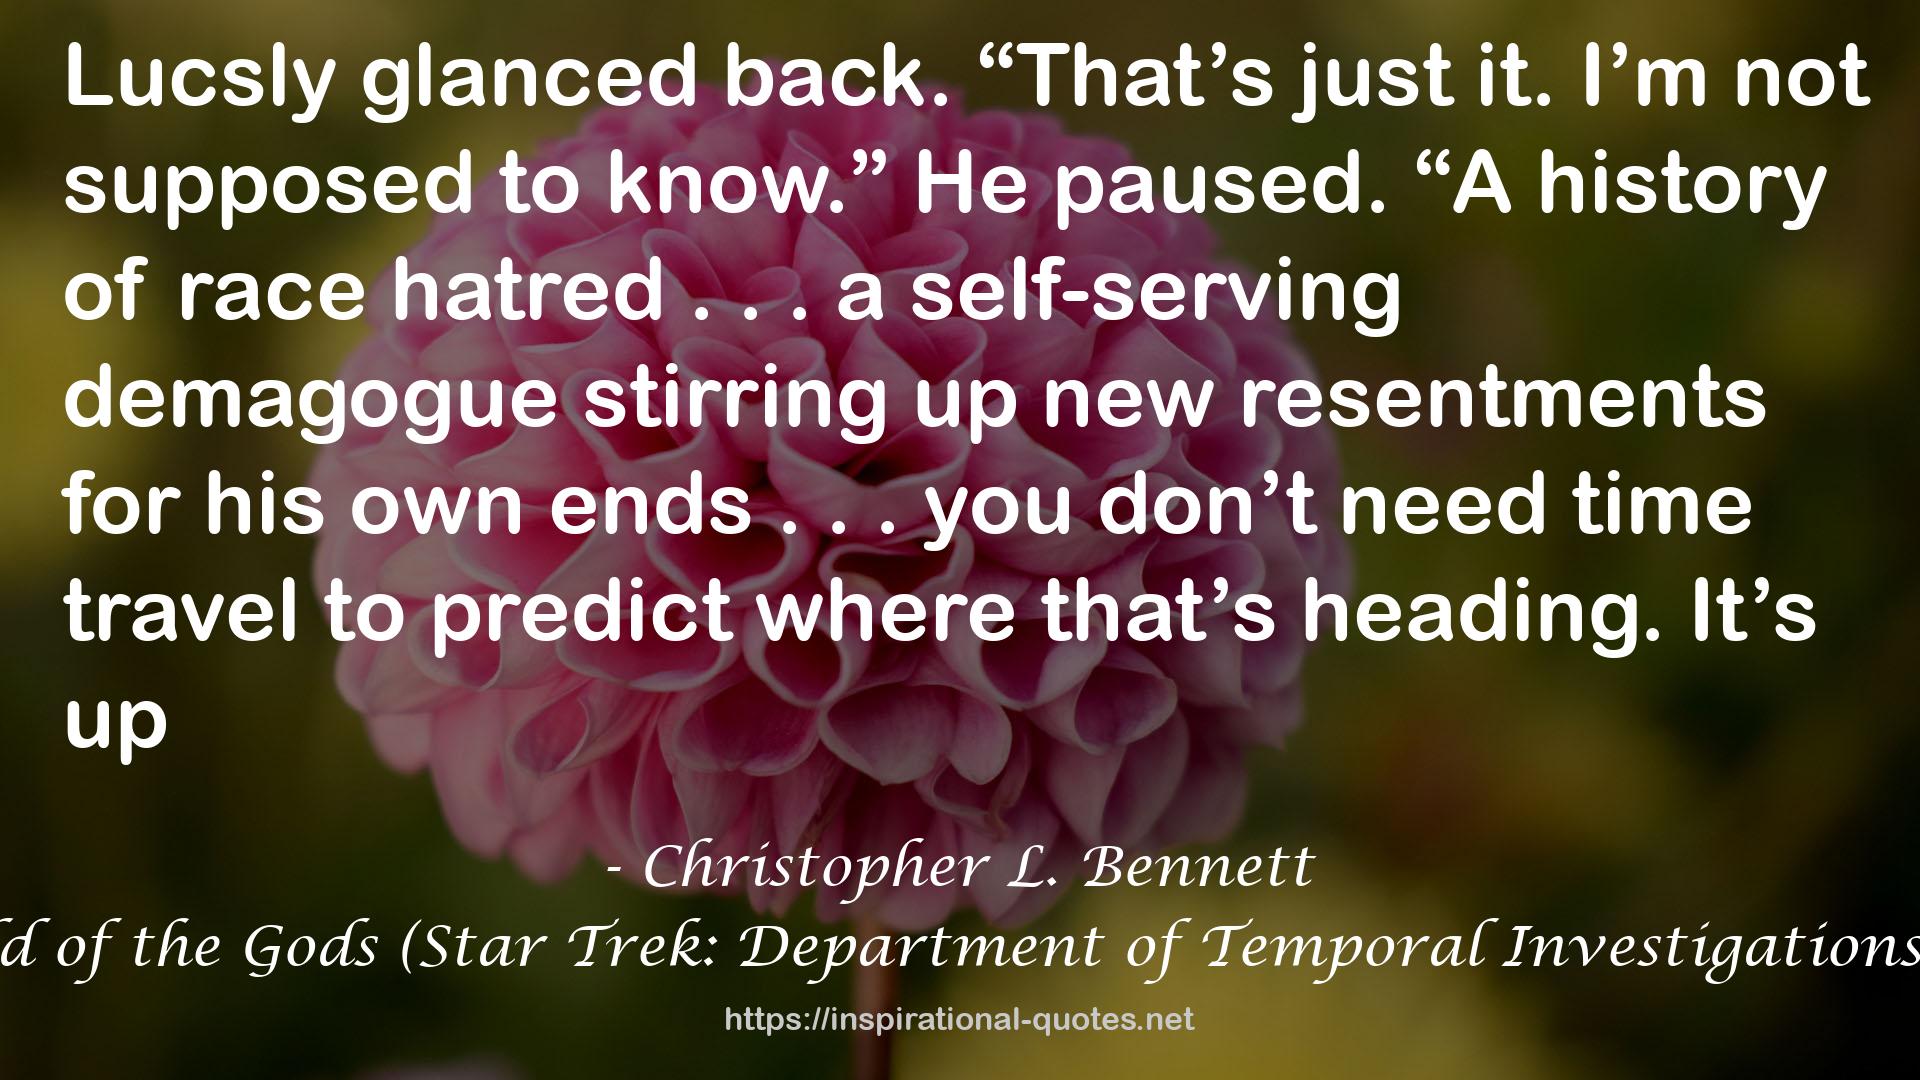 Shield of the Gods (Star Trek: Department of Temporal Investigations, #5)) QUOTES